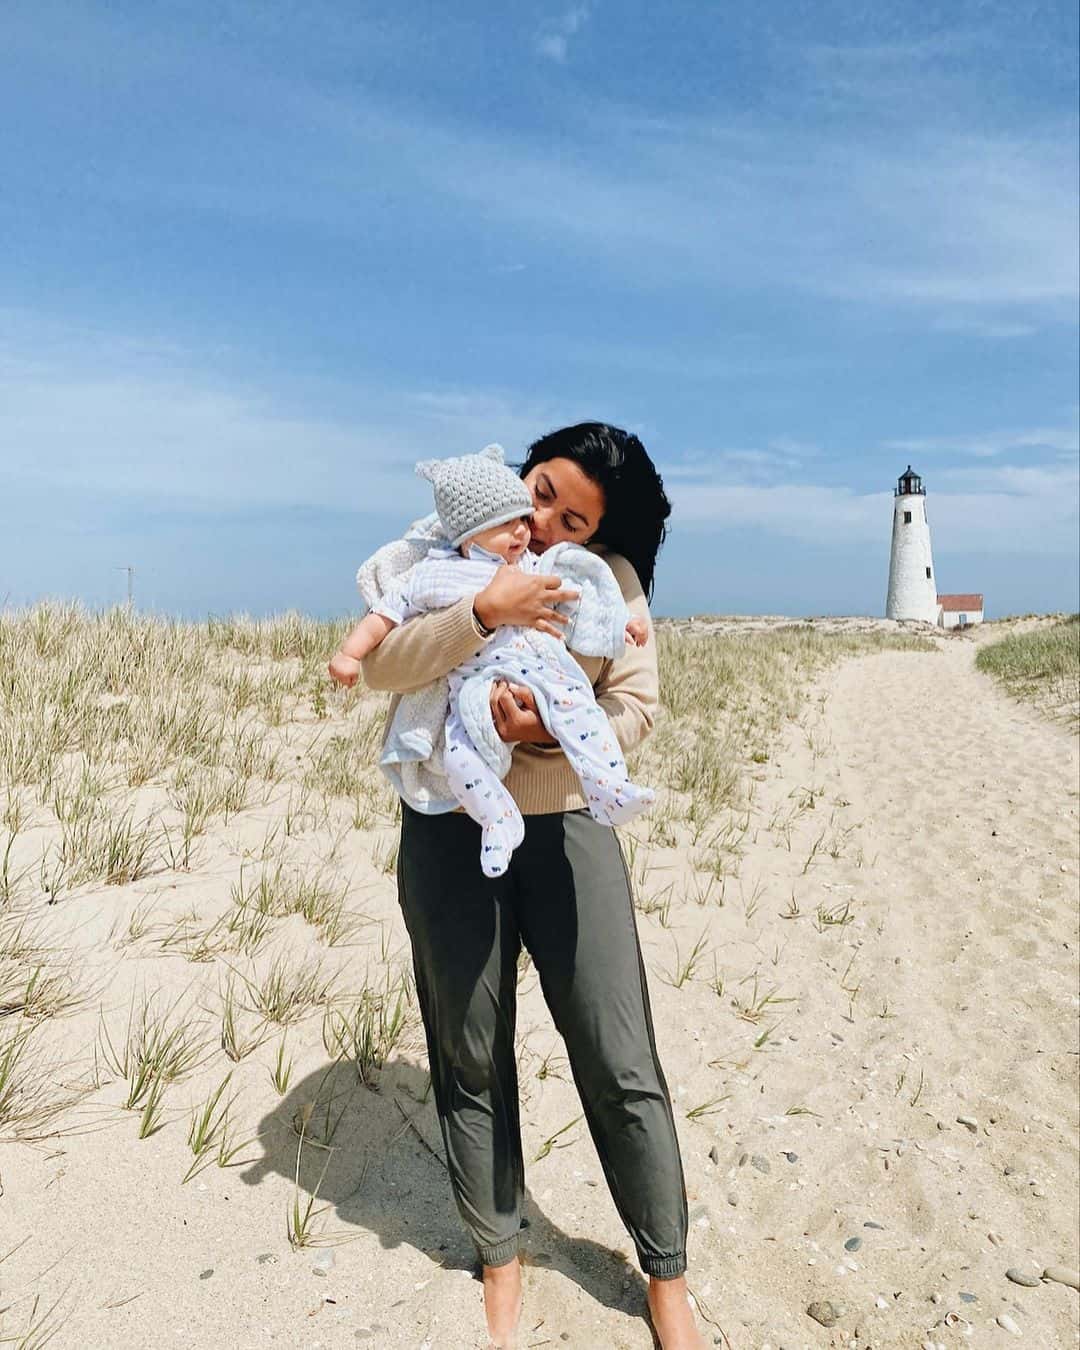 On World IBD Day, Bryanah expressed her gratitude by posting a picture featuring herself and her son Wyatt. She reflected on the capabilities of her body and shared a collection of joyful photos from the past year, highlighting both significant and small achievements. 